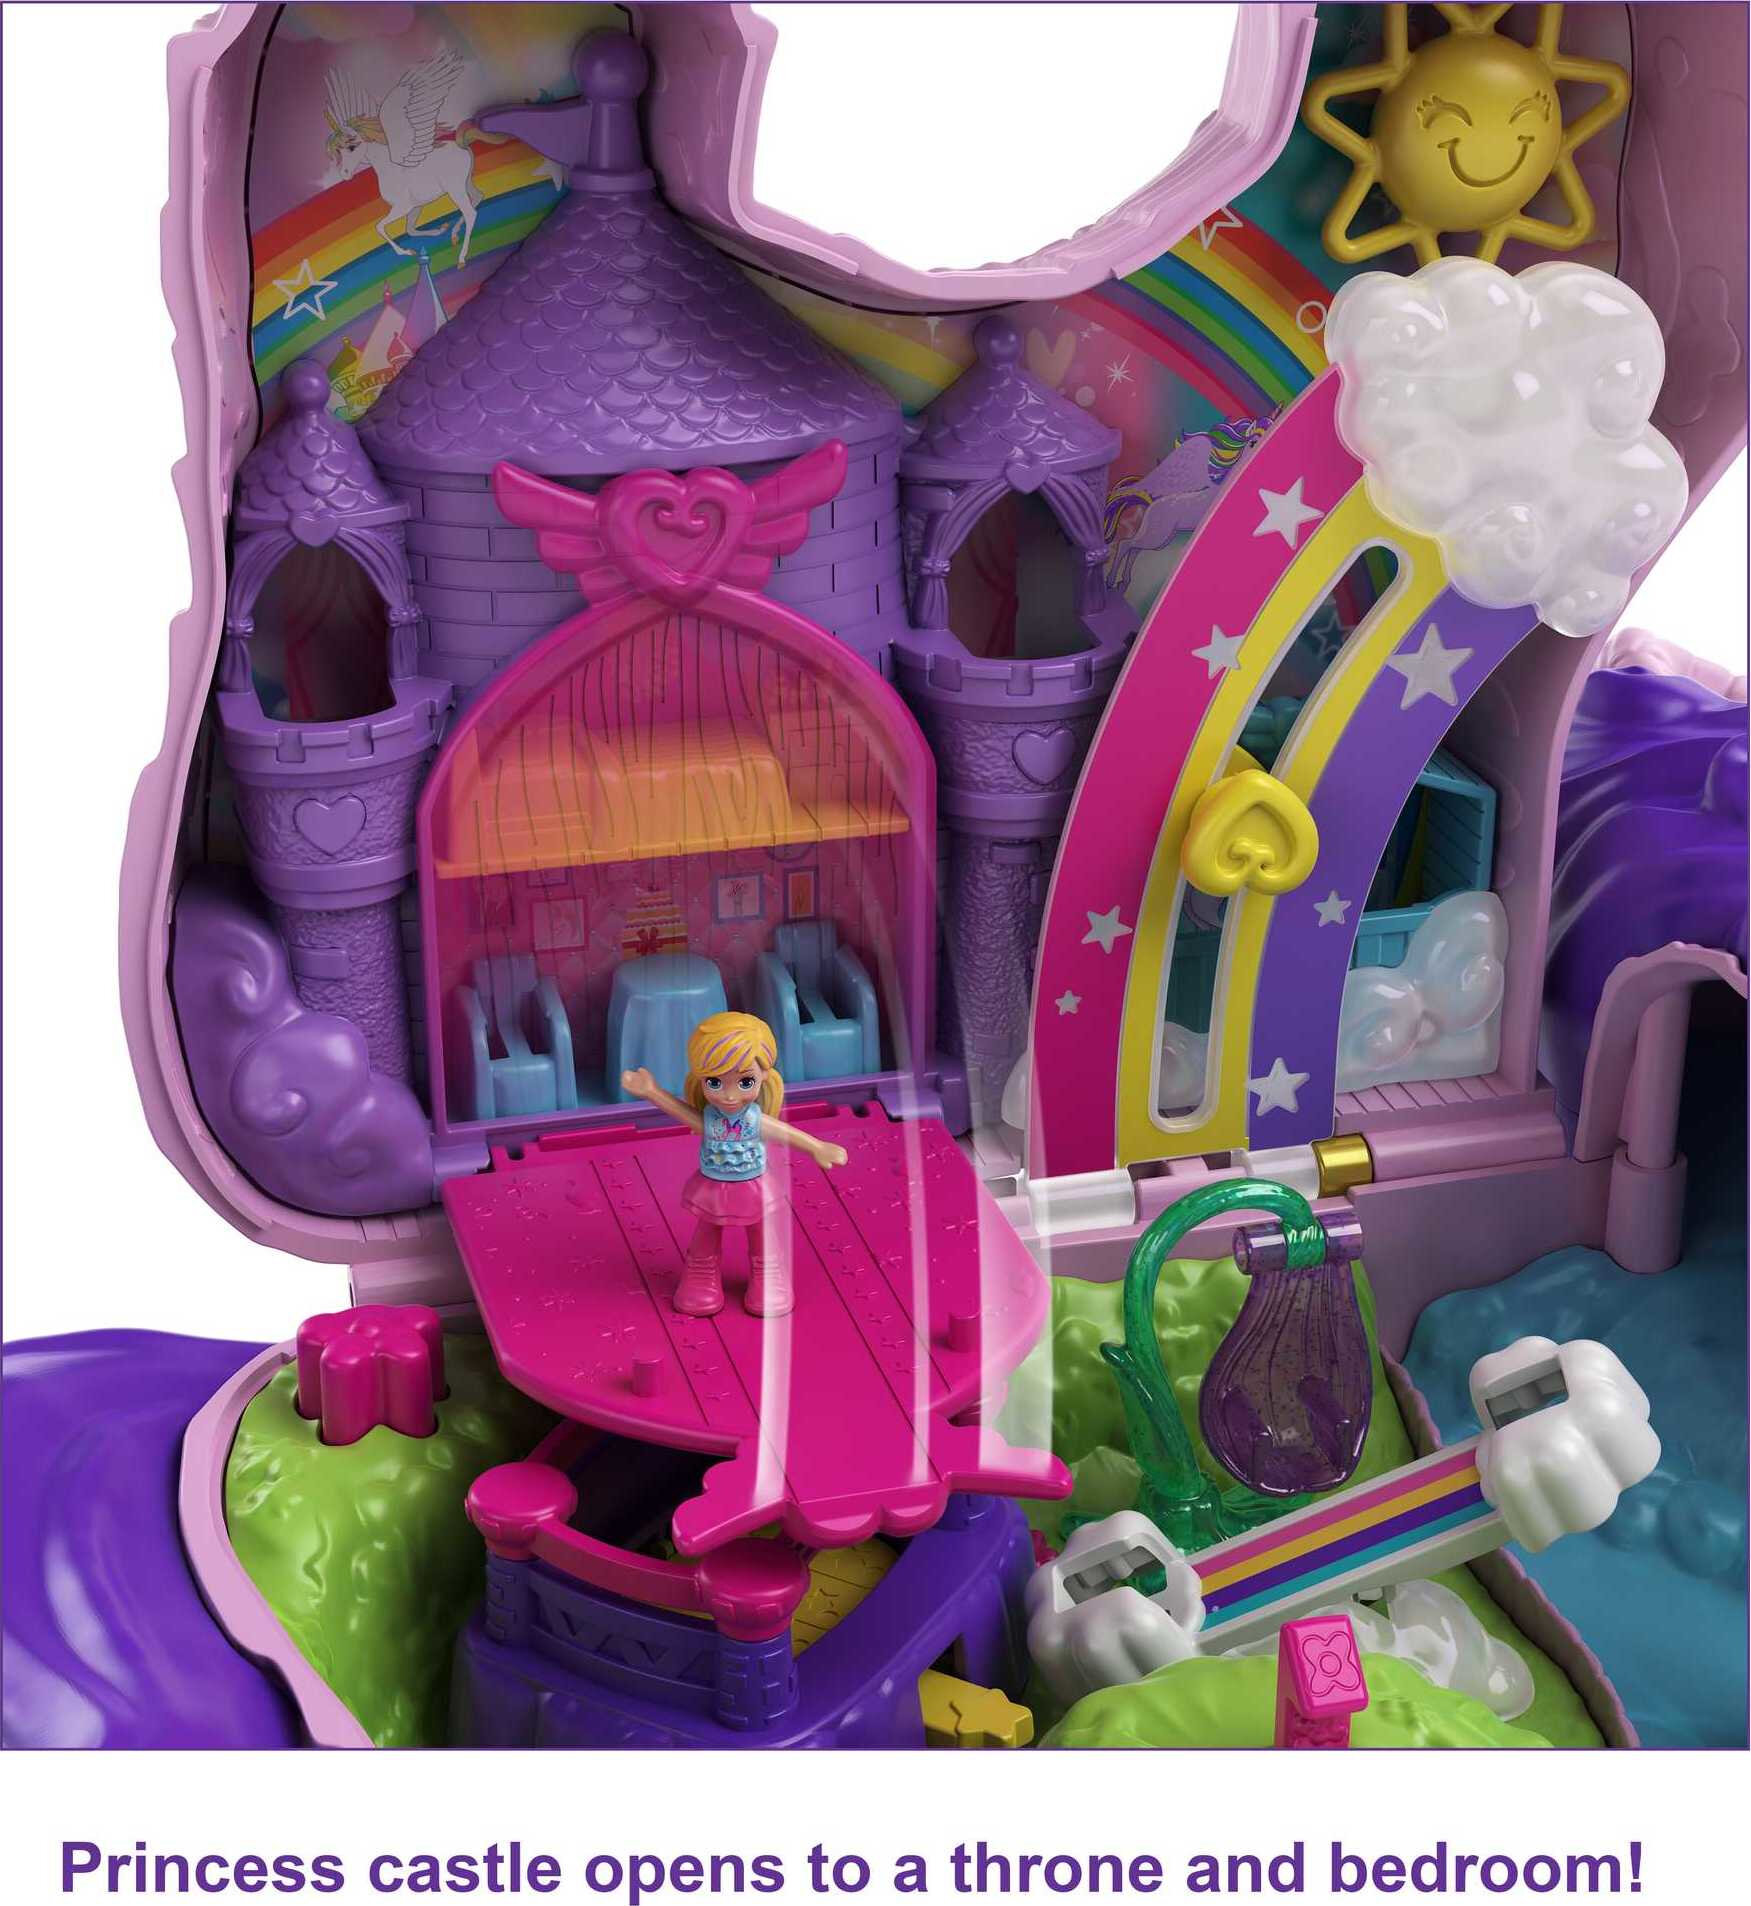 Polly Pocket 2-in-1 Unicorn Party Travel Toy, Large Compact with 2 Dolls & 25 Surprise Accessories - image 5 of 9